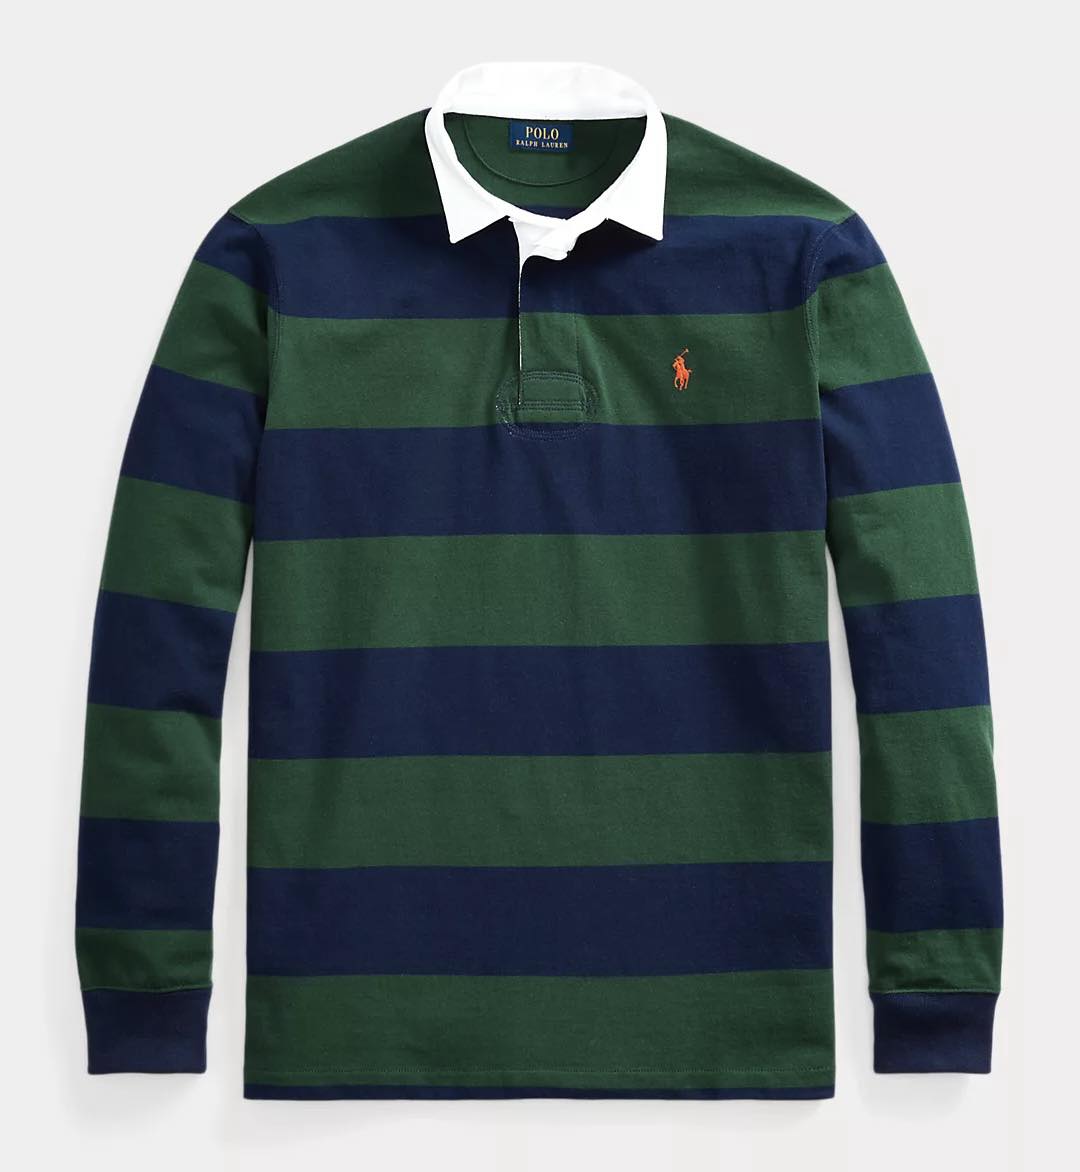 Polo Ralph Lauren Longsleeve Rugby - Cruise Navy/College Green